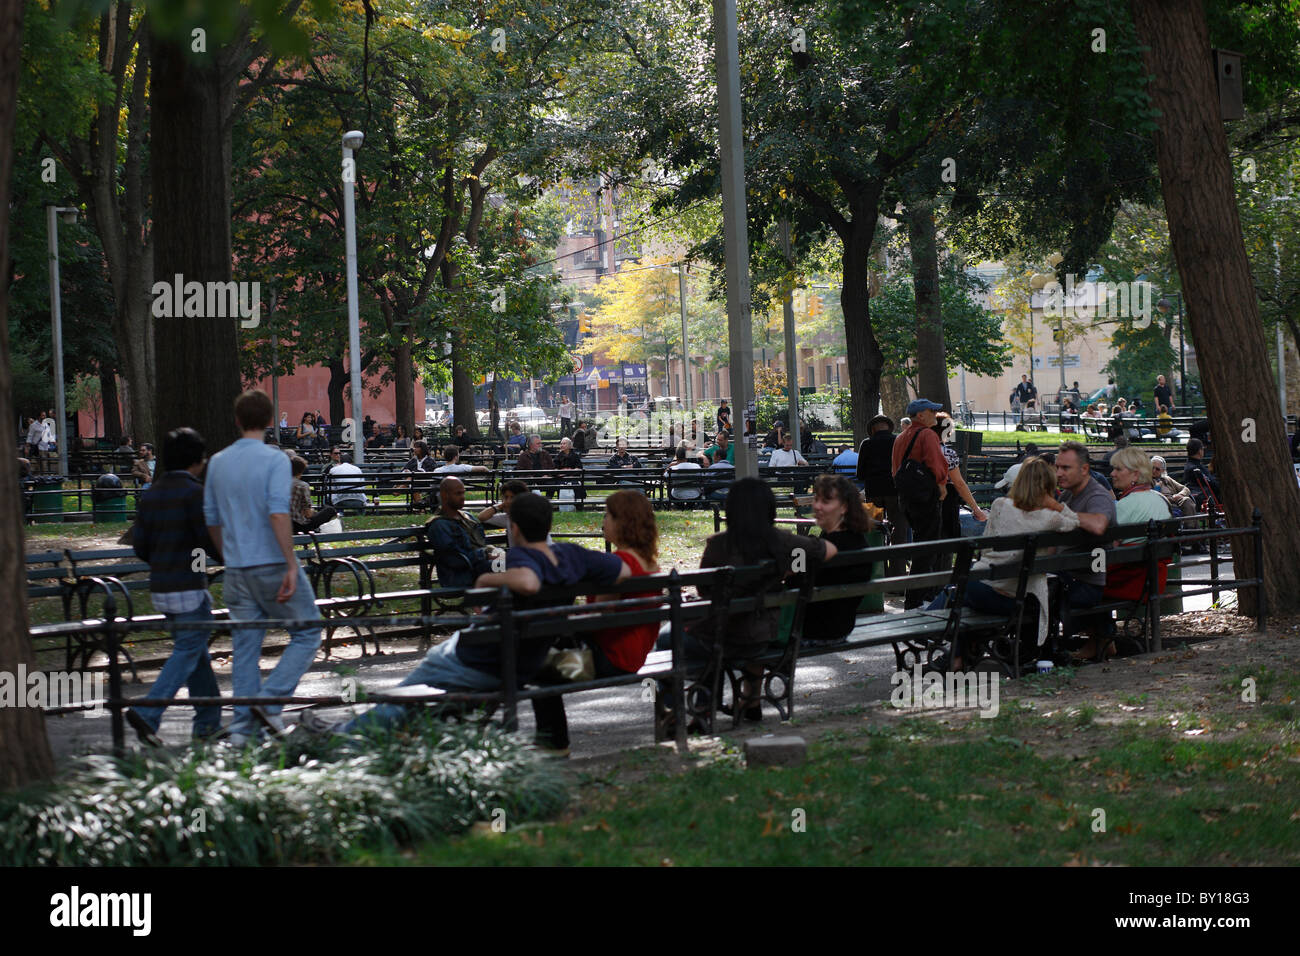 New Yorkers in Washington Square Park, New York City, United States of America Stock Photo